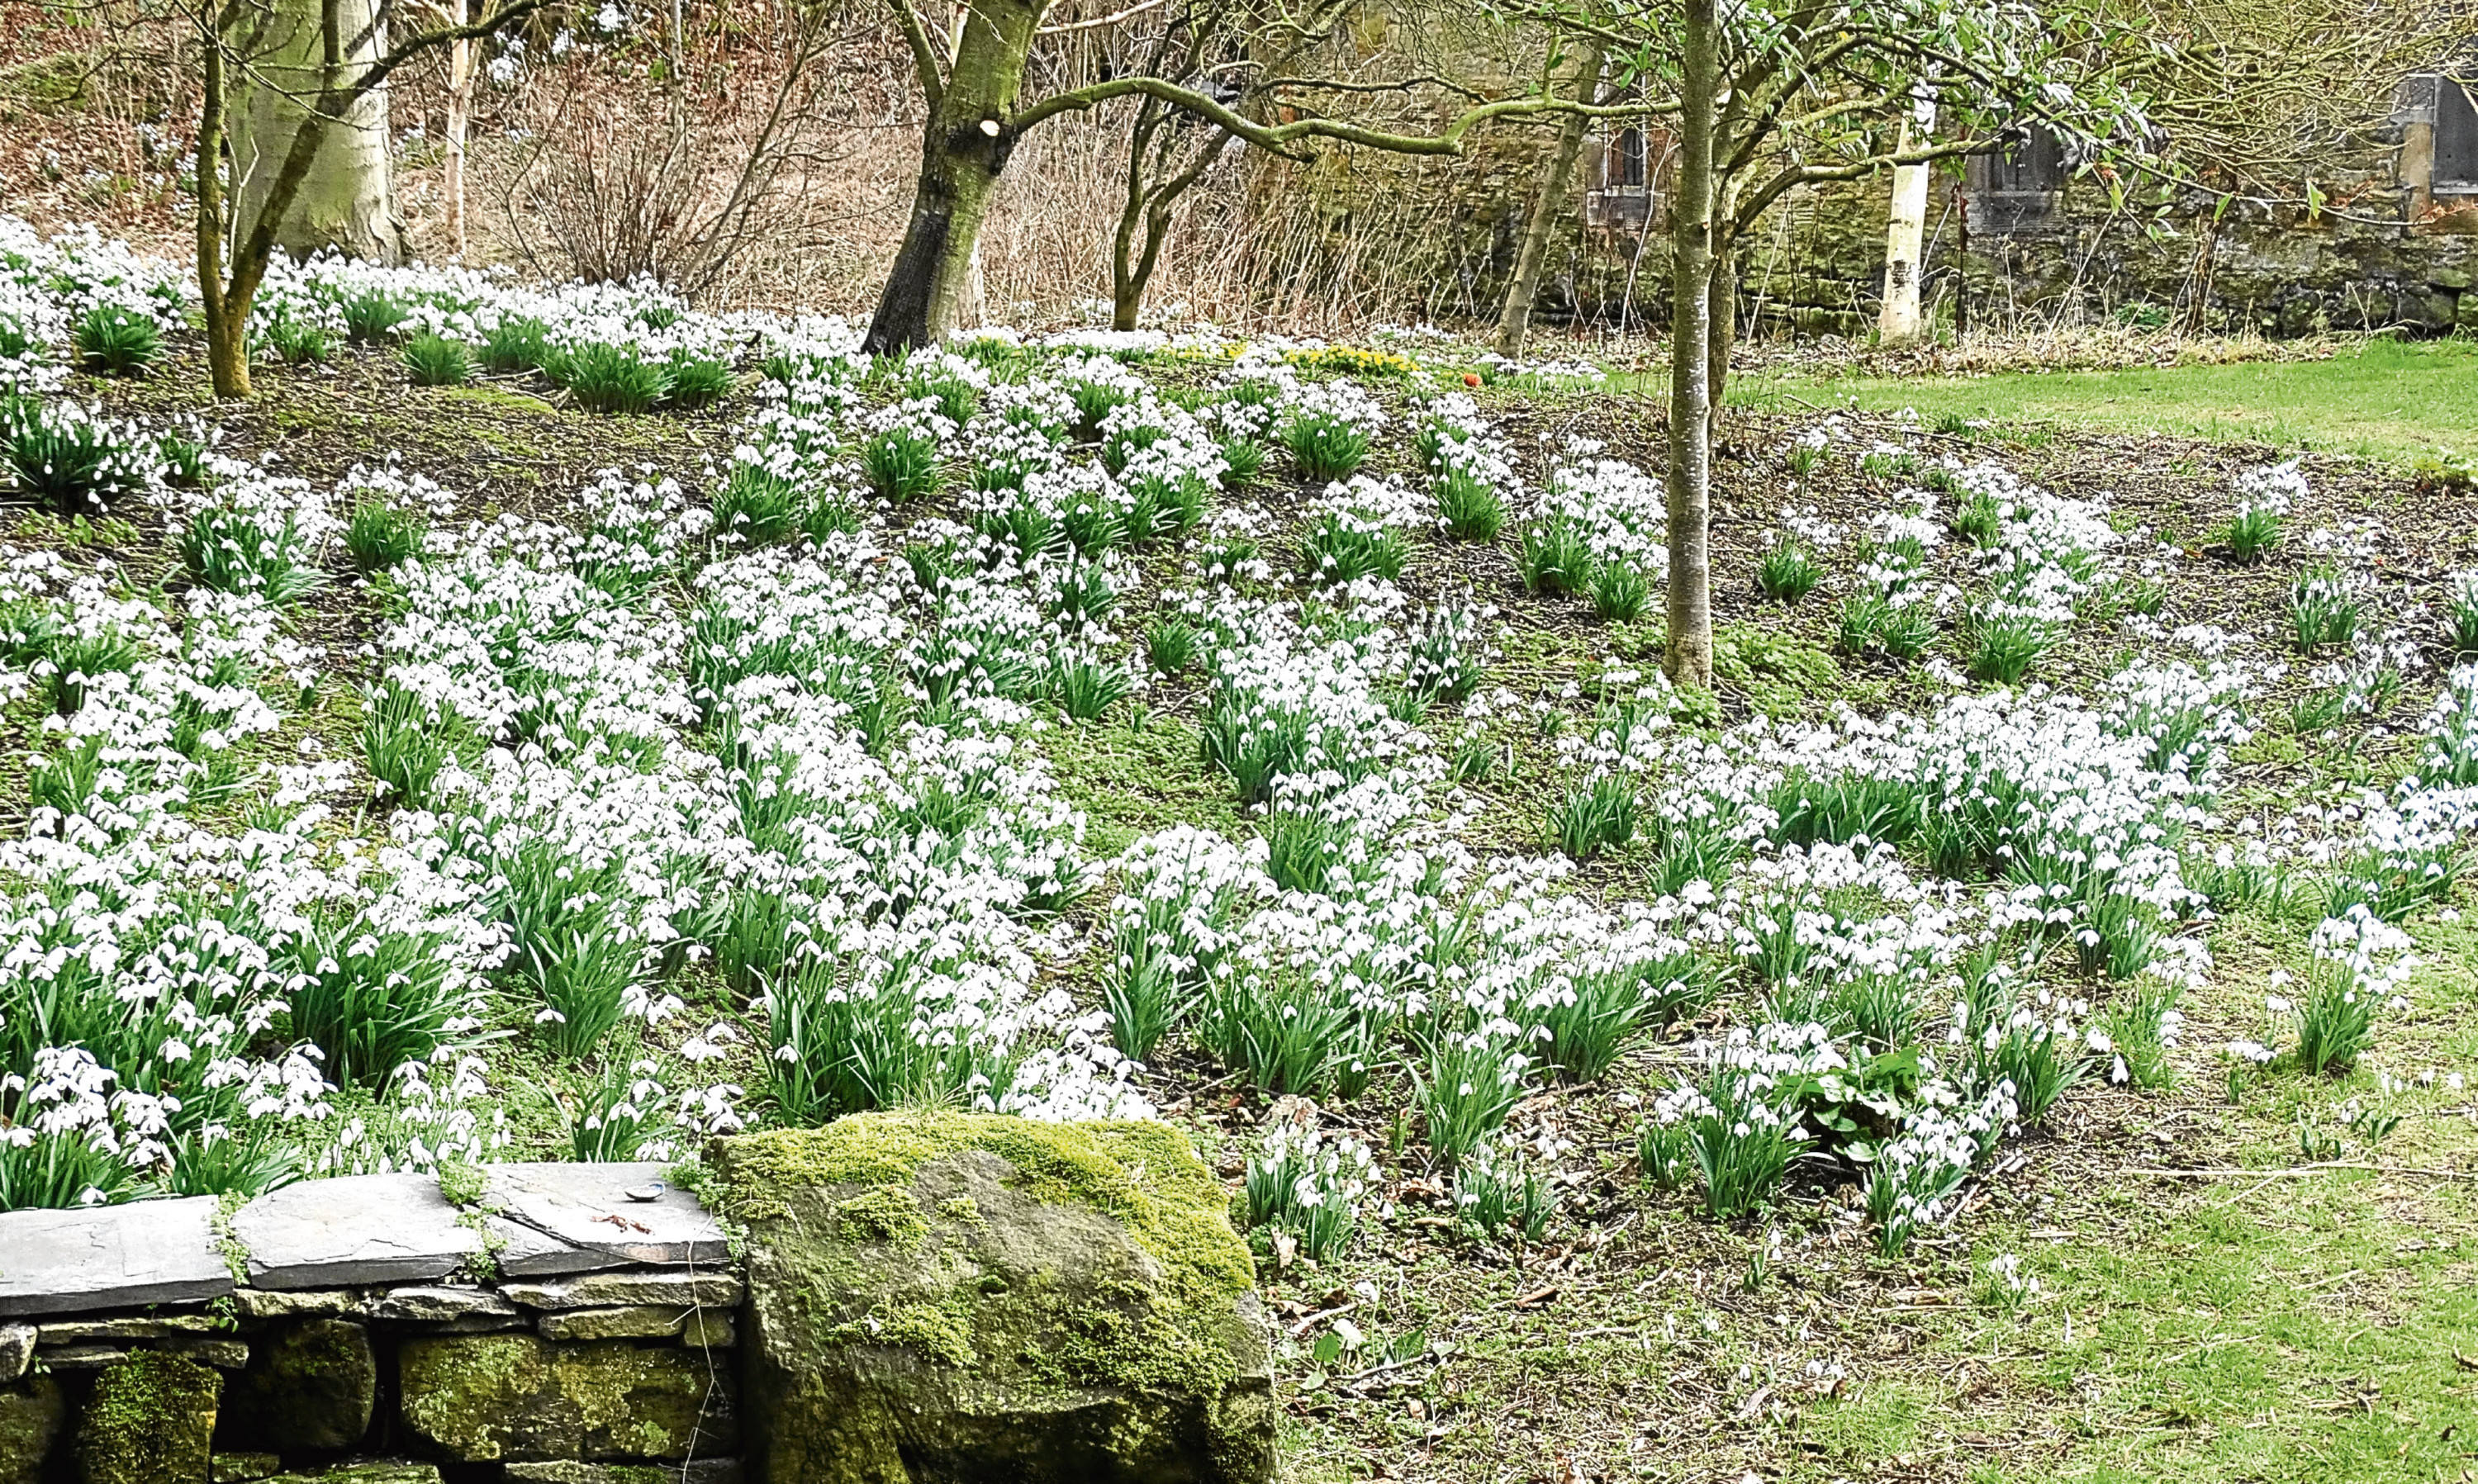 Snowdrops at Cambo, Fife, with a splash of golden aconites in the background.